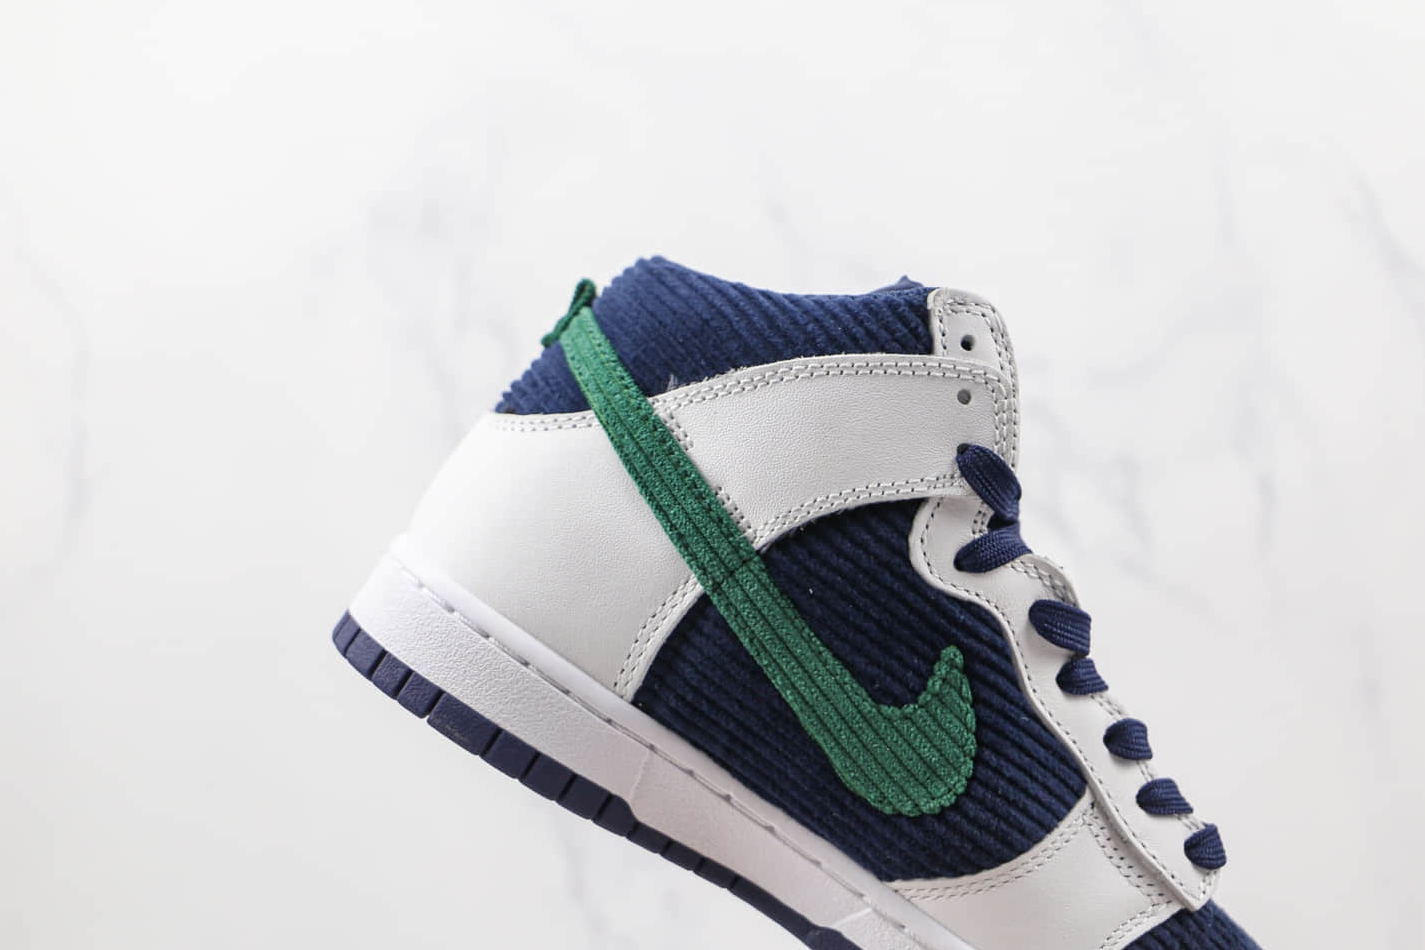 Nike Dunk High 'Sports Specialties' DH0953-400: Limited Edition Sneaker for Sports Enthusiasts